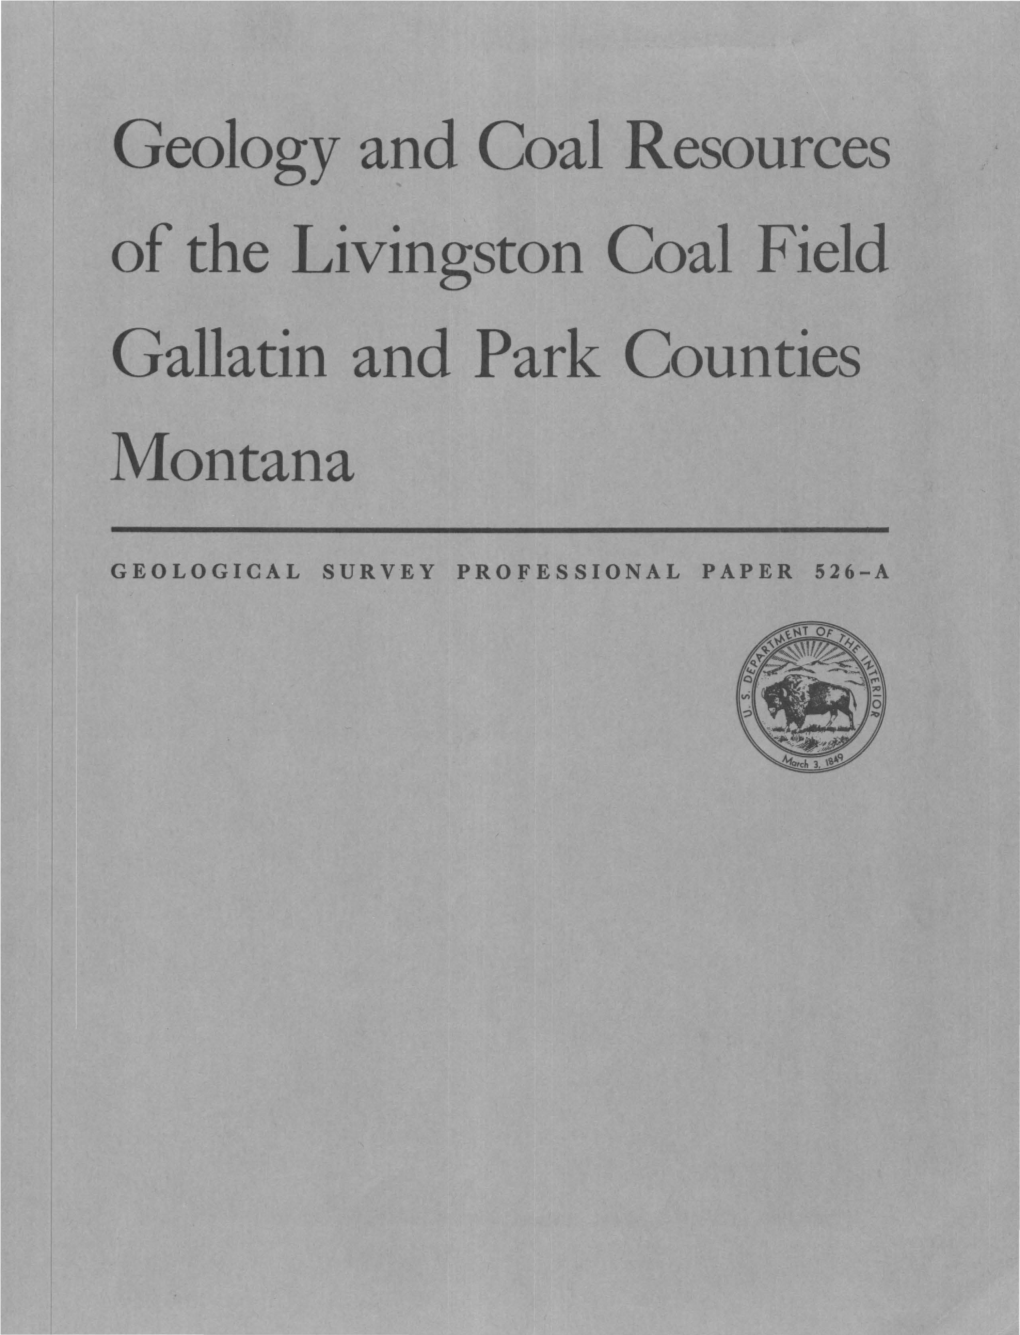 Geology and Coal Resources of the Livingston Coal Field Gallatin and Park Counties Montana